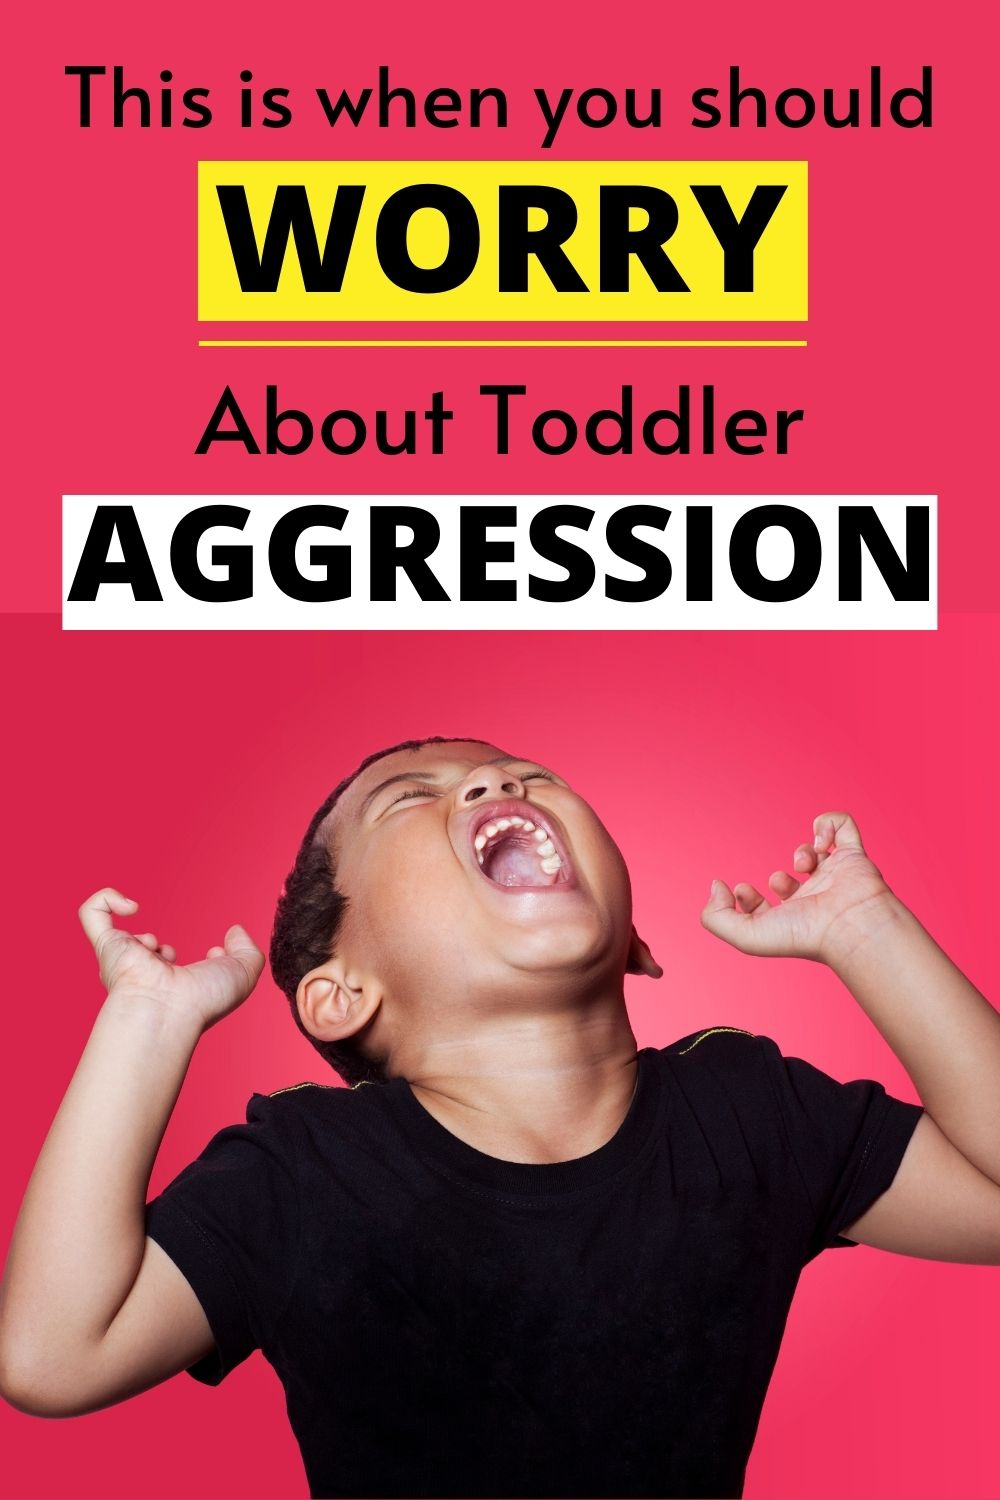 Text reads "This is when you should worry about toddler aggression" with image of screaming toddler